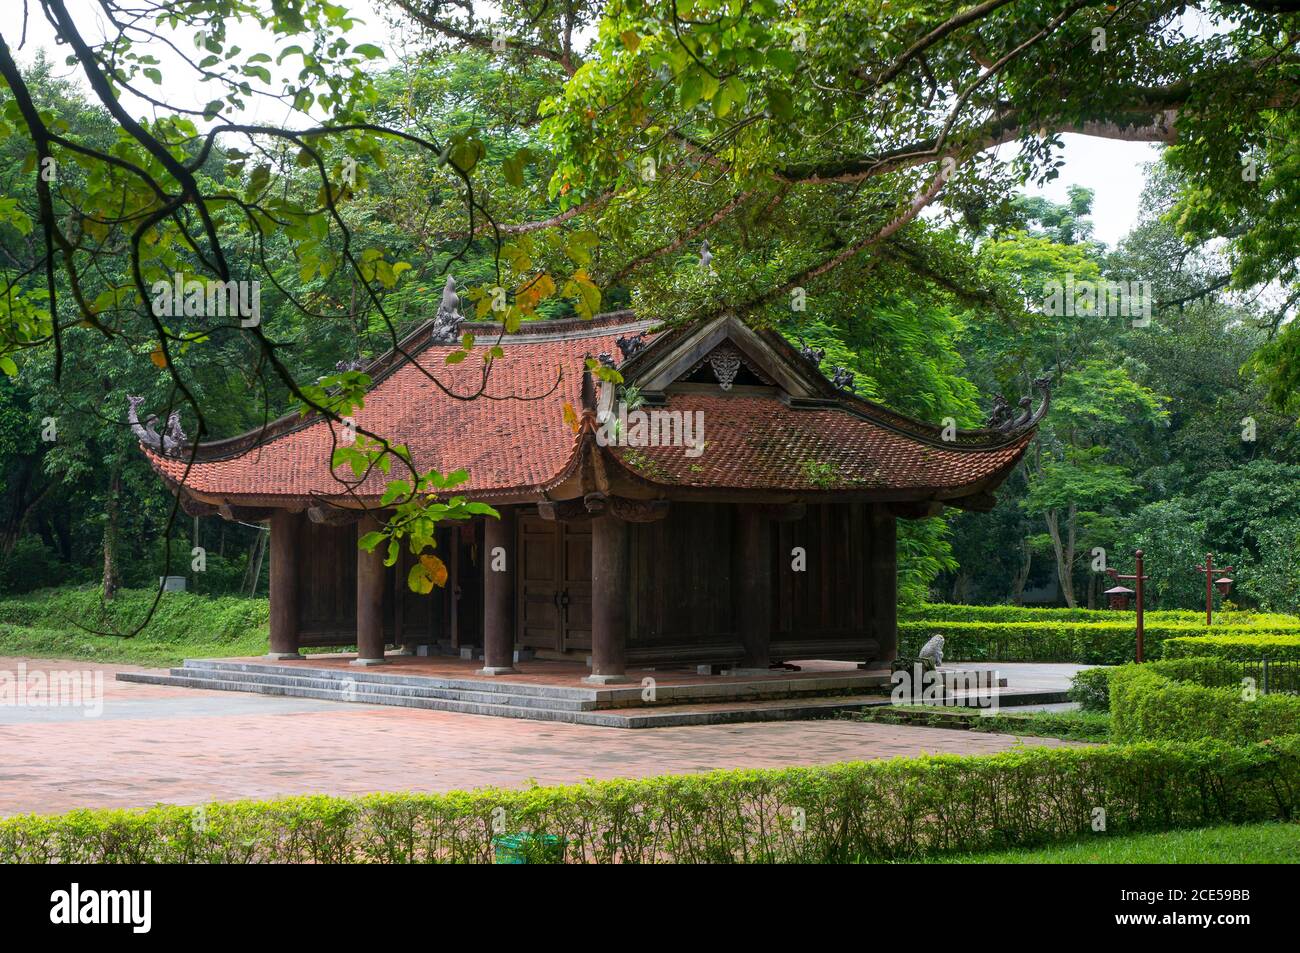 The relics of Lam Kinh Temple, Thanh Hoa, Vietnam Stock Photo